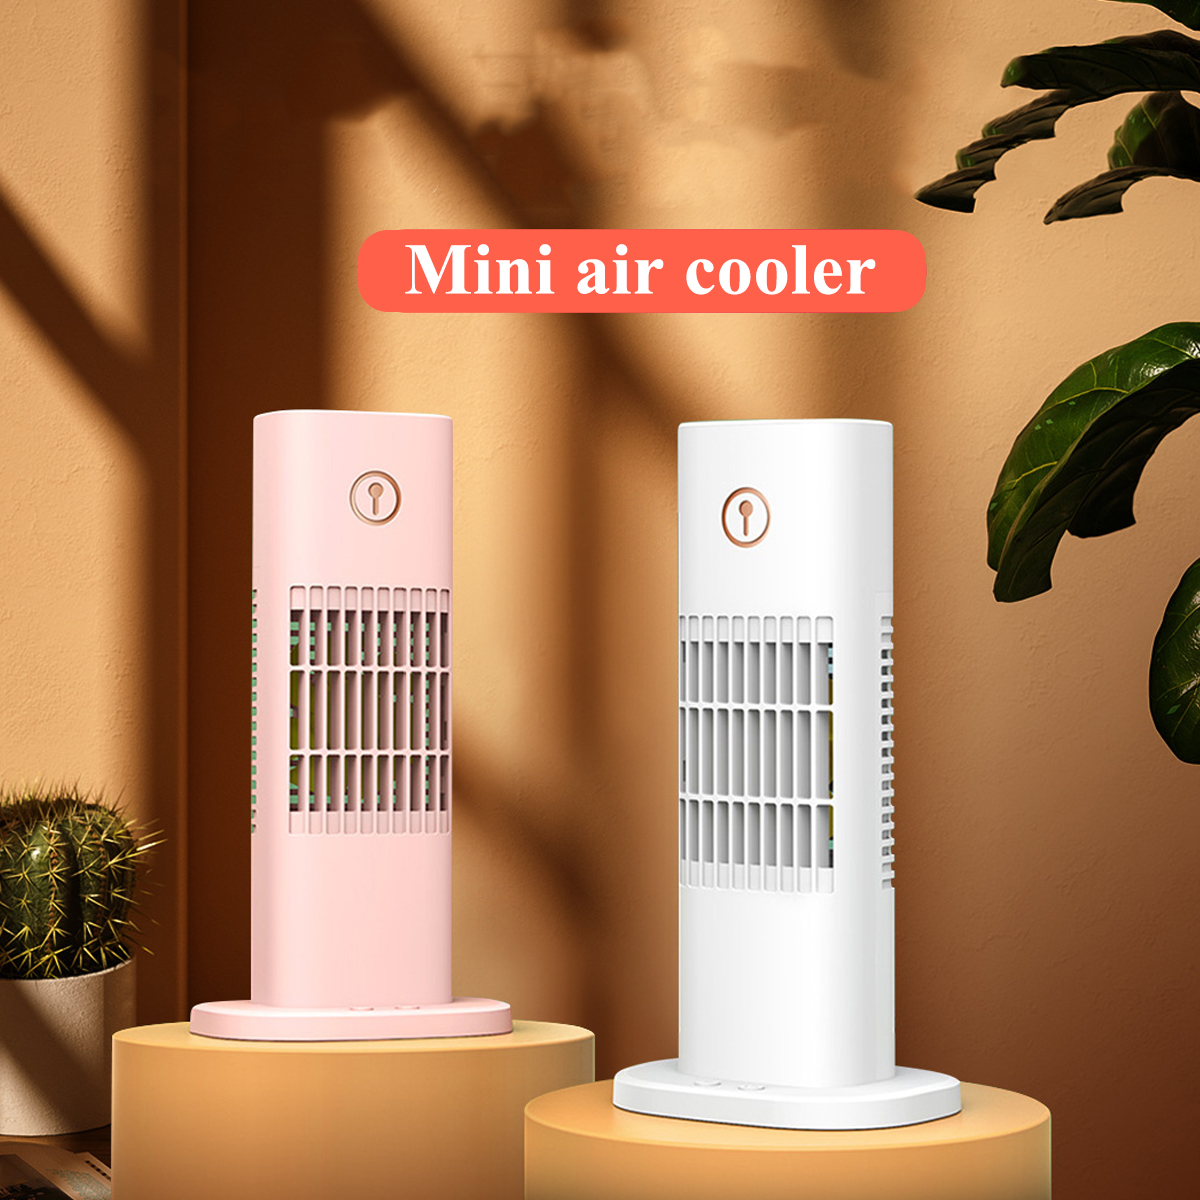 Bakeey-3-Gear-Mini-Water-Cooling-Fan-Spray-Humidification-Portable-Air-Cooler-Table-Fan-1837572-7